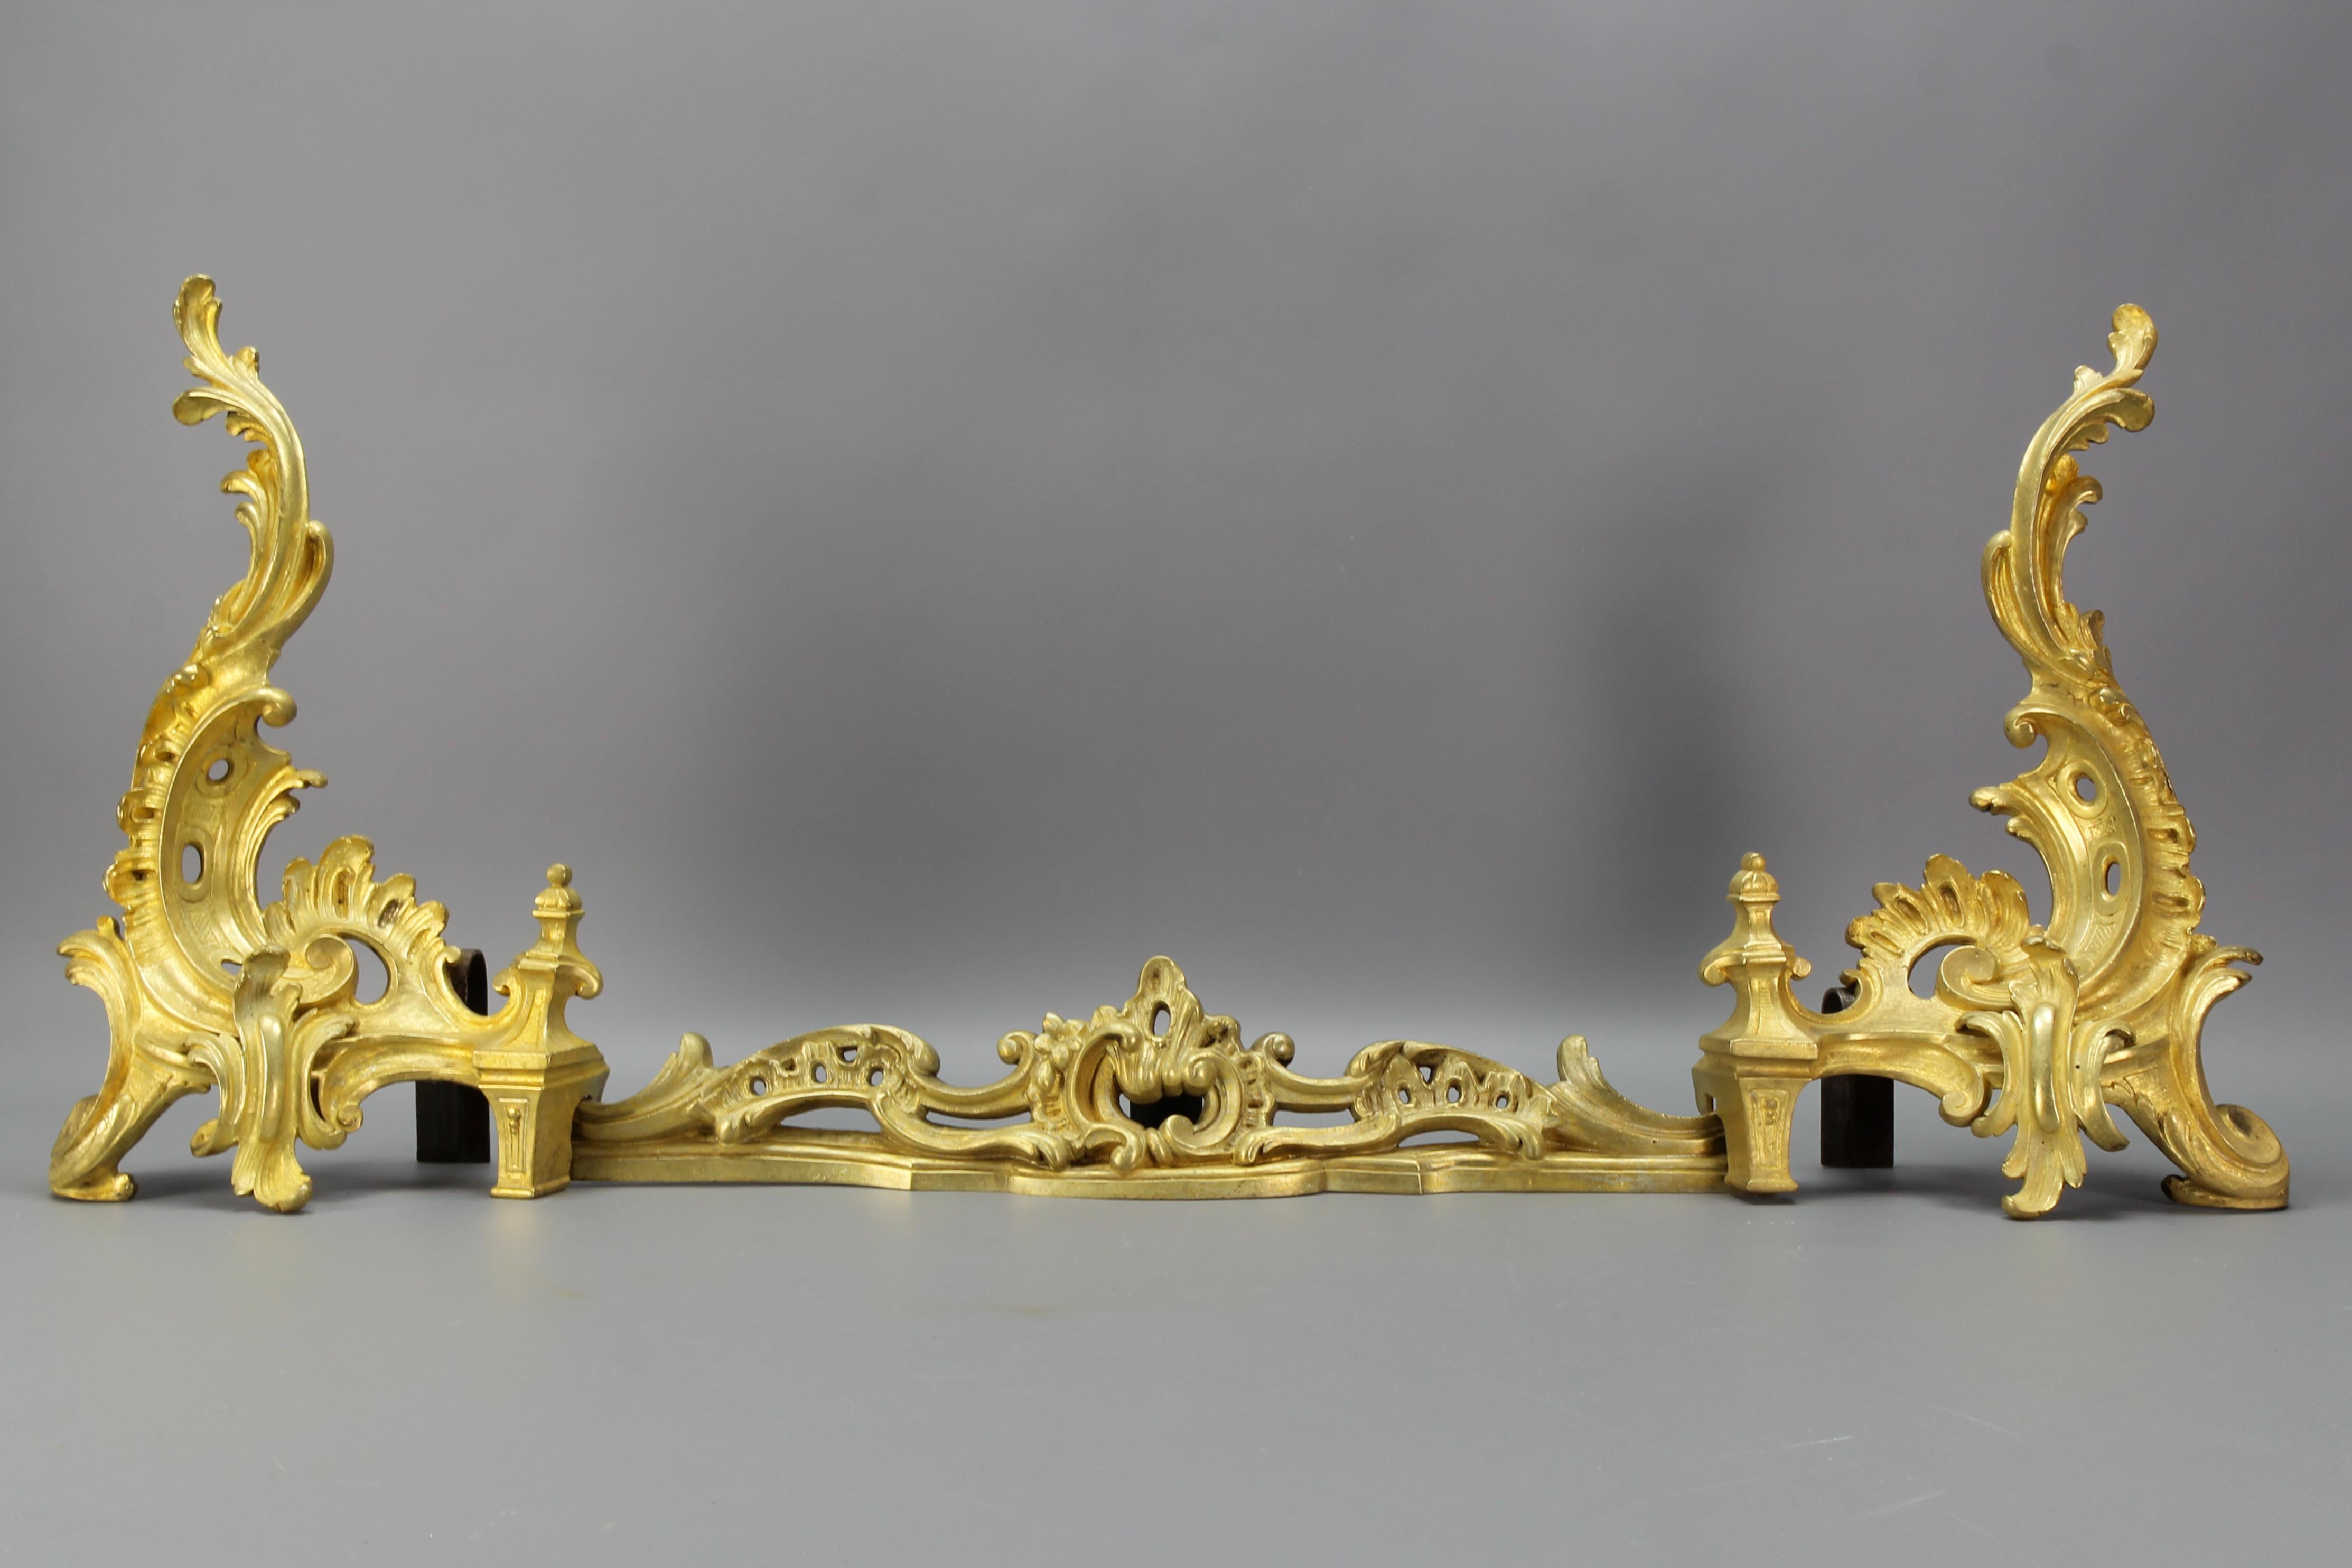 These impressive French Louis XV or Rococo-style gilt bronze andirons with their crossbar date to the end of the 1800s. 
Richly ornate with rocailles, C-scrolls, and foliate accents, with very curved edges. 
This beautiful antique fireplace set has